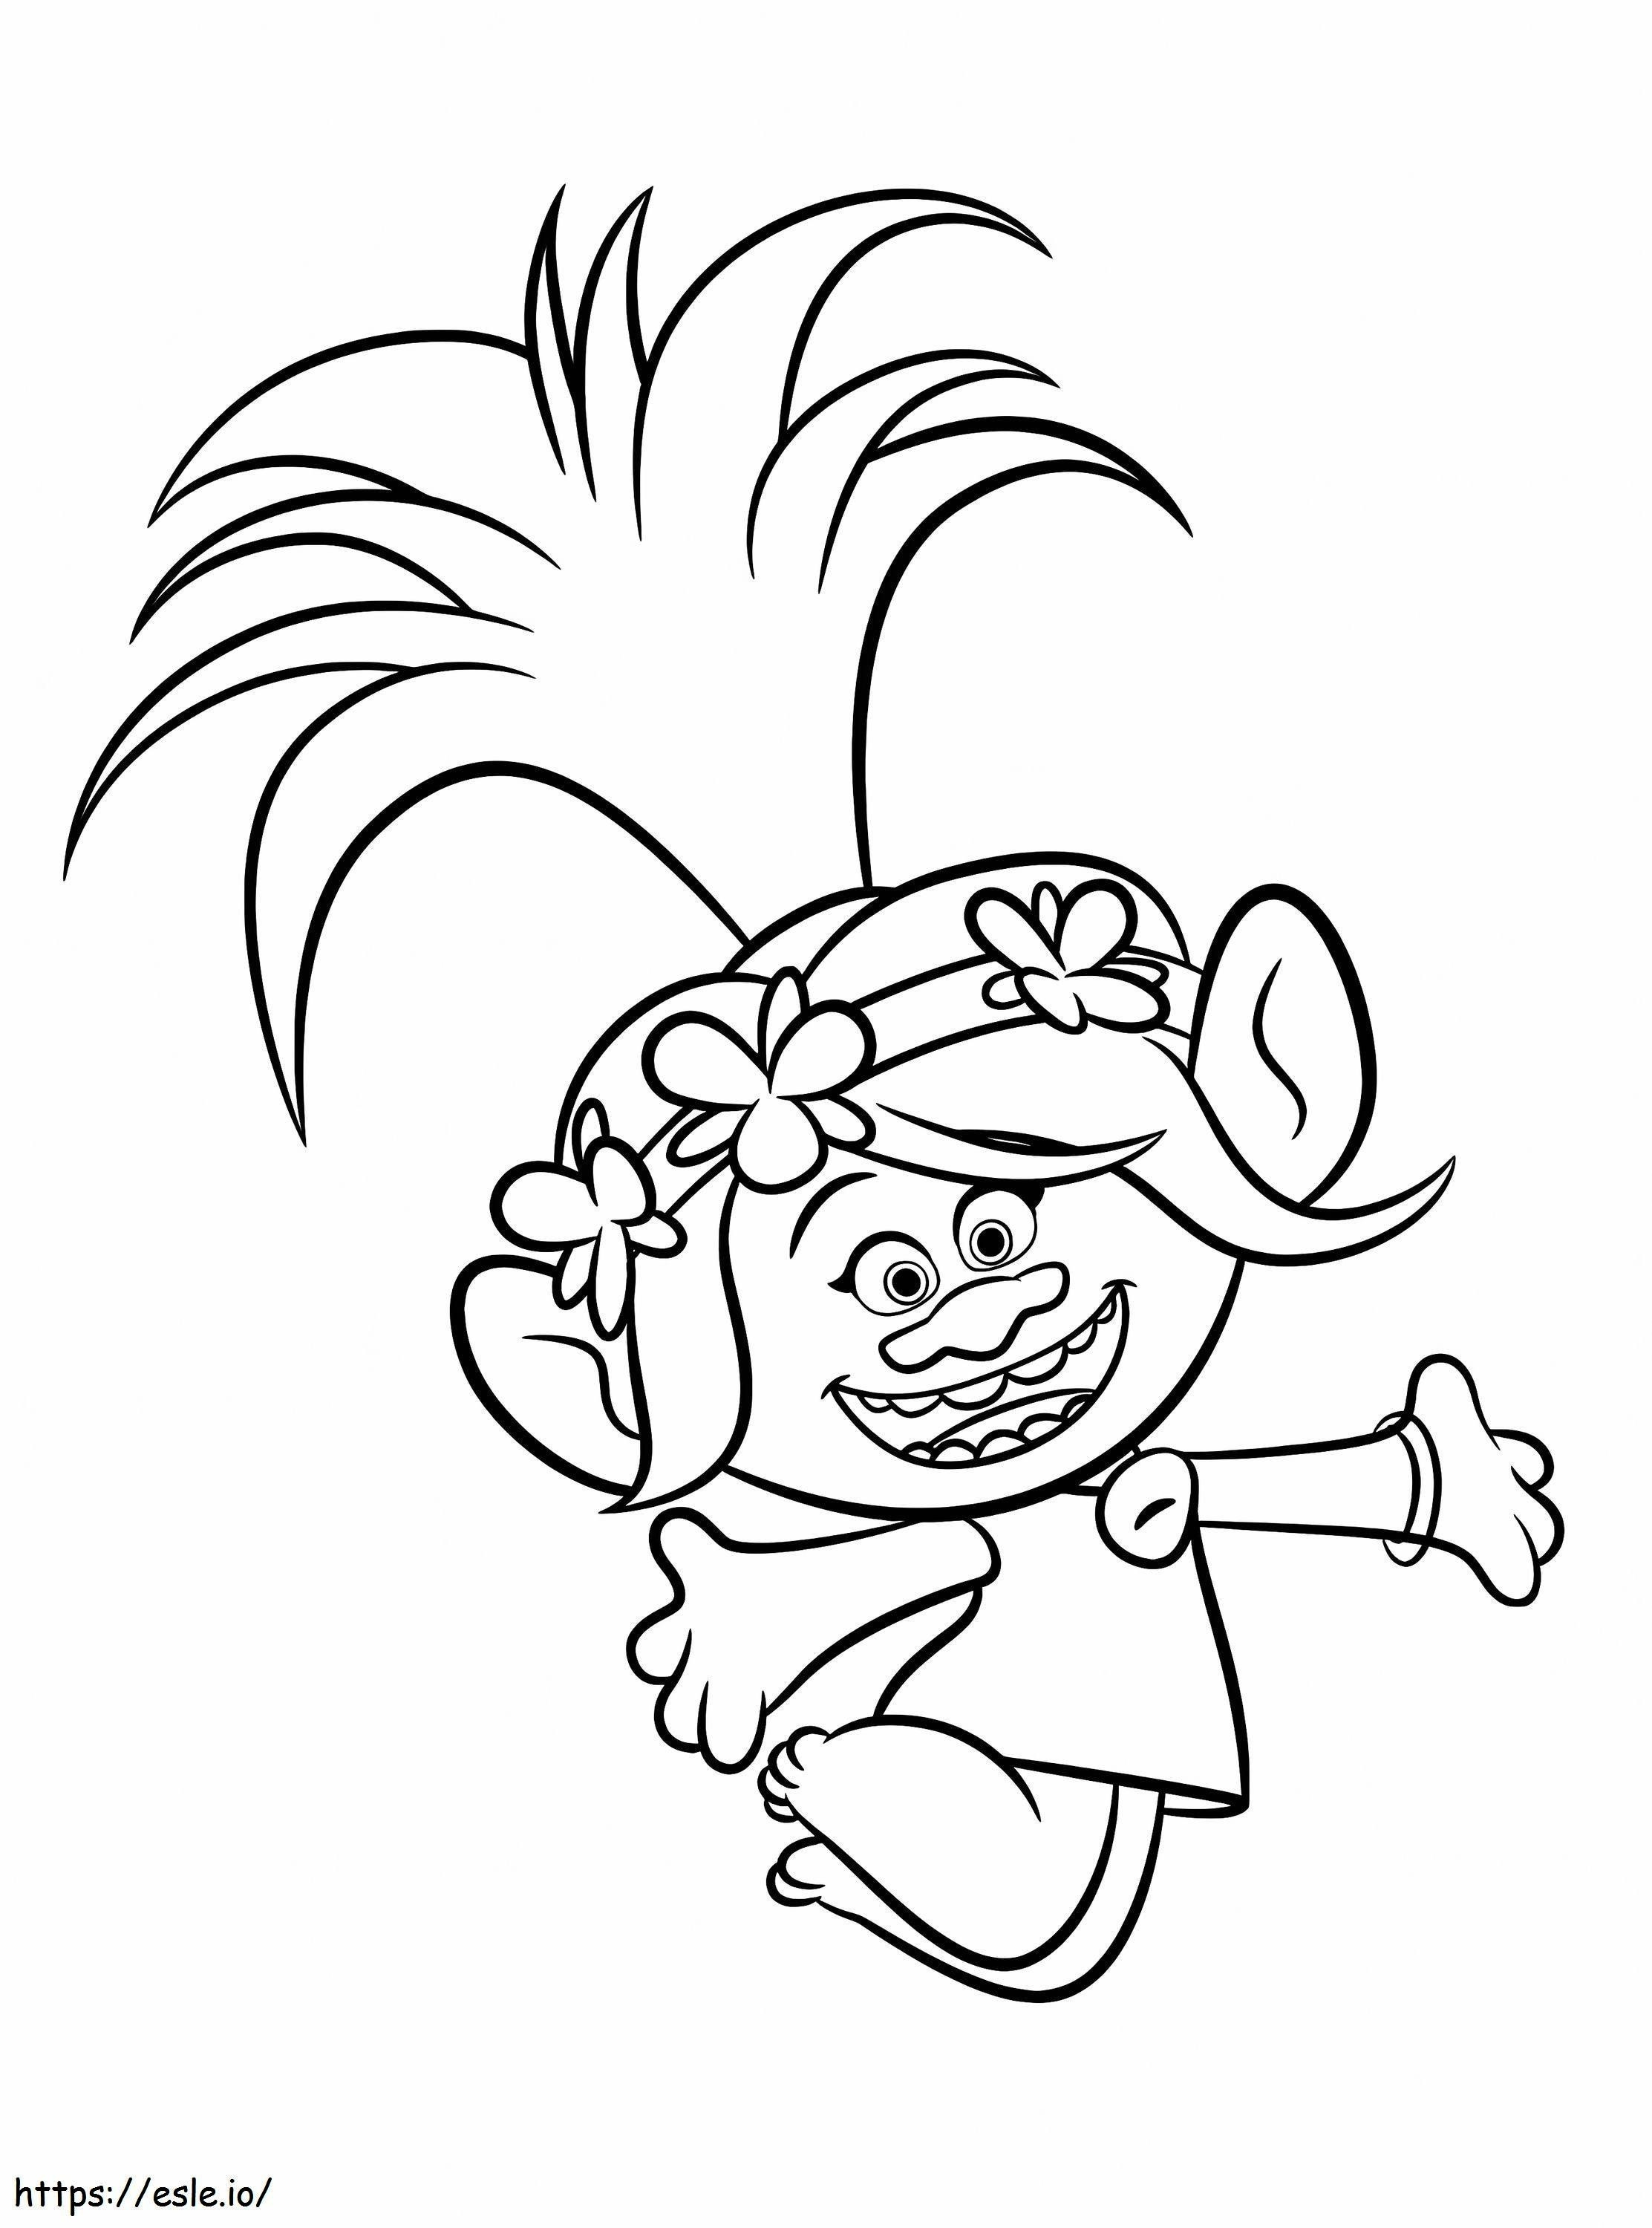 1582254203 Princess Poppy Lovely Pin By Shannon Diana Lynn On Coloring Sheets Of Princess Poppy coloring page